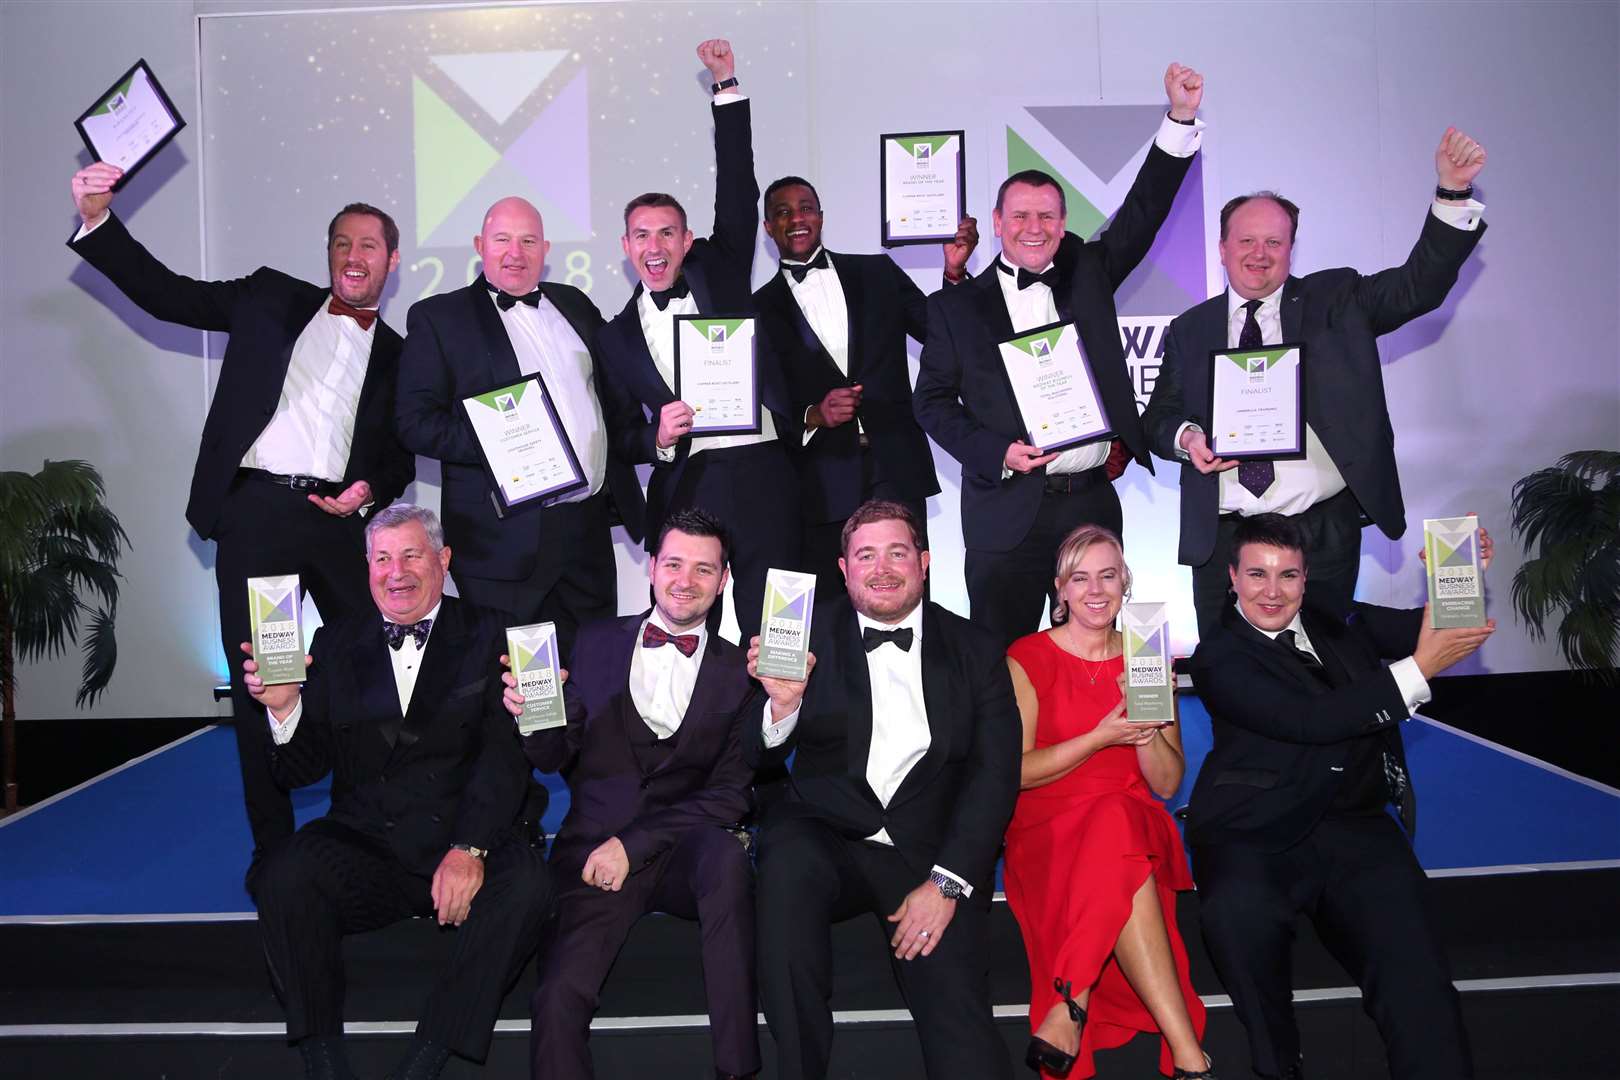 Award winners from Medway Business Awards presentations in 2018